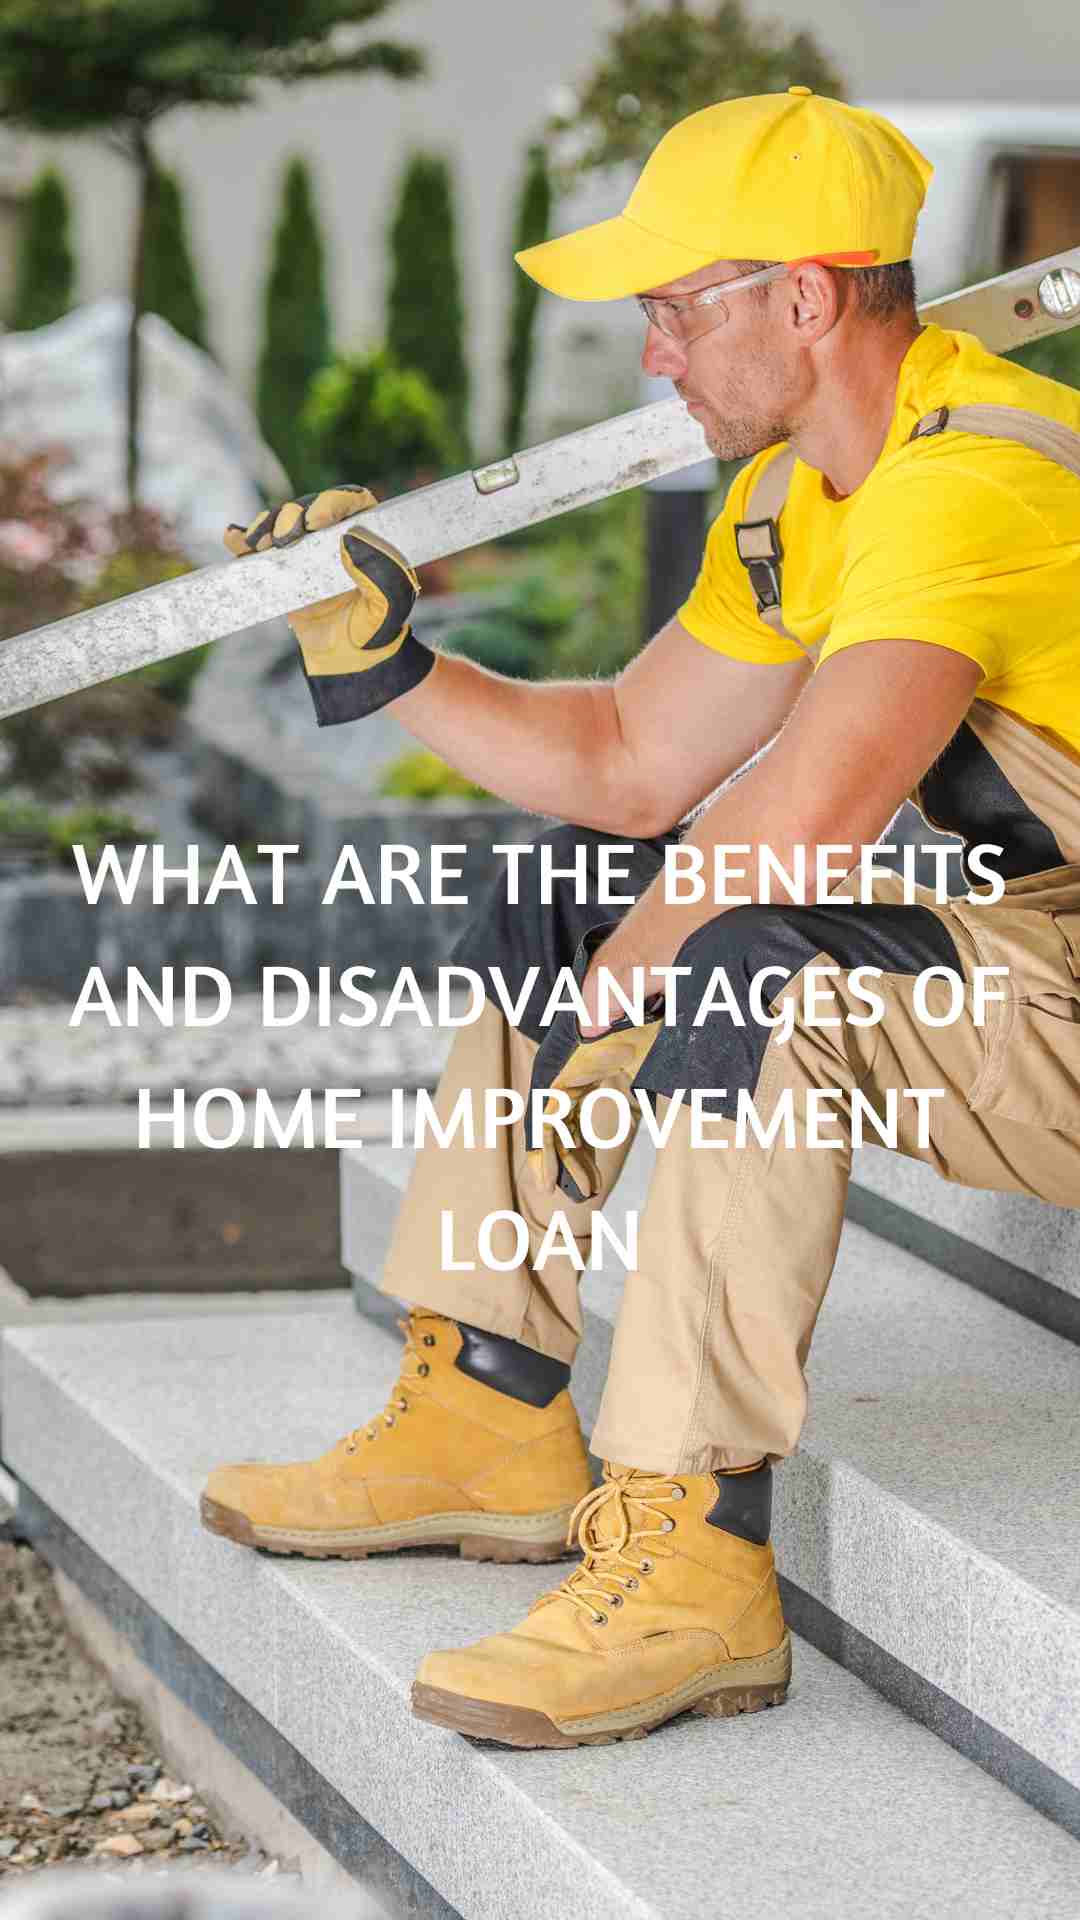 What are the benefits and disadvantages of home improvement loan